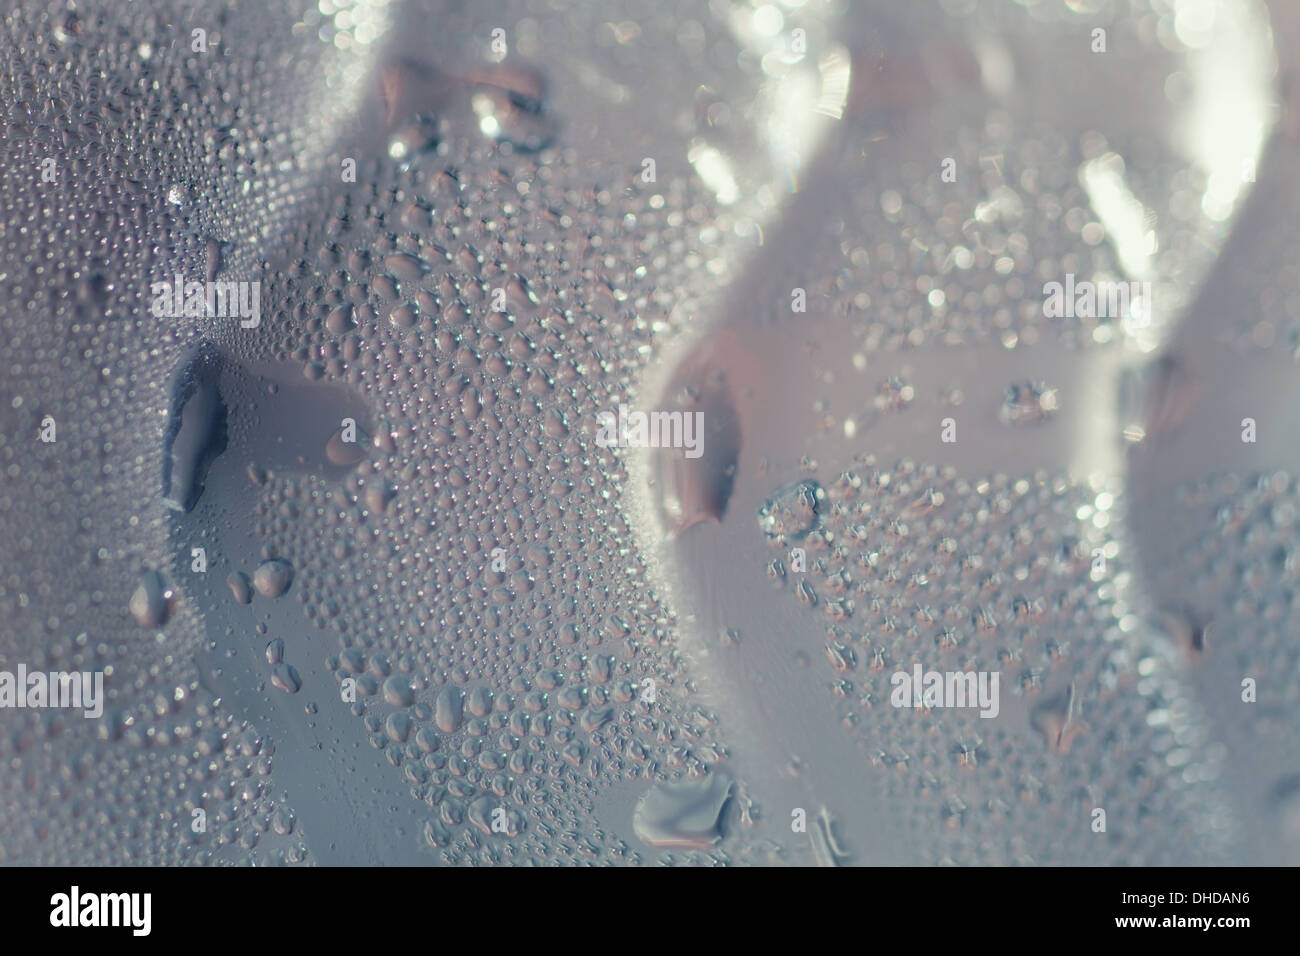 https://c8.alamy.com/comp/DHDAN6/texture-of-a-glass-bottle-with-water-droplets-DHDAN6.jpg